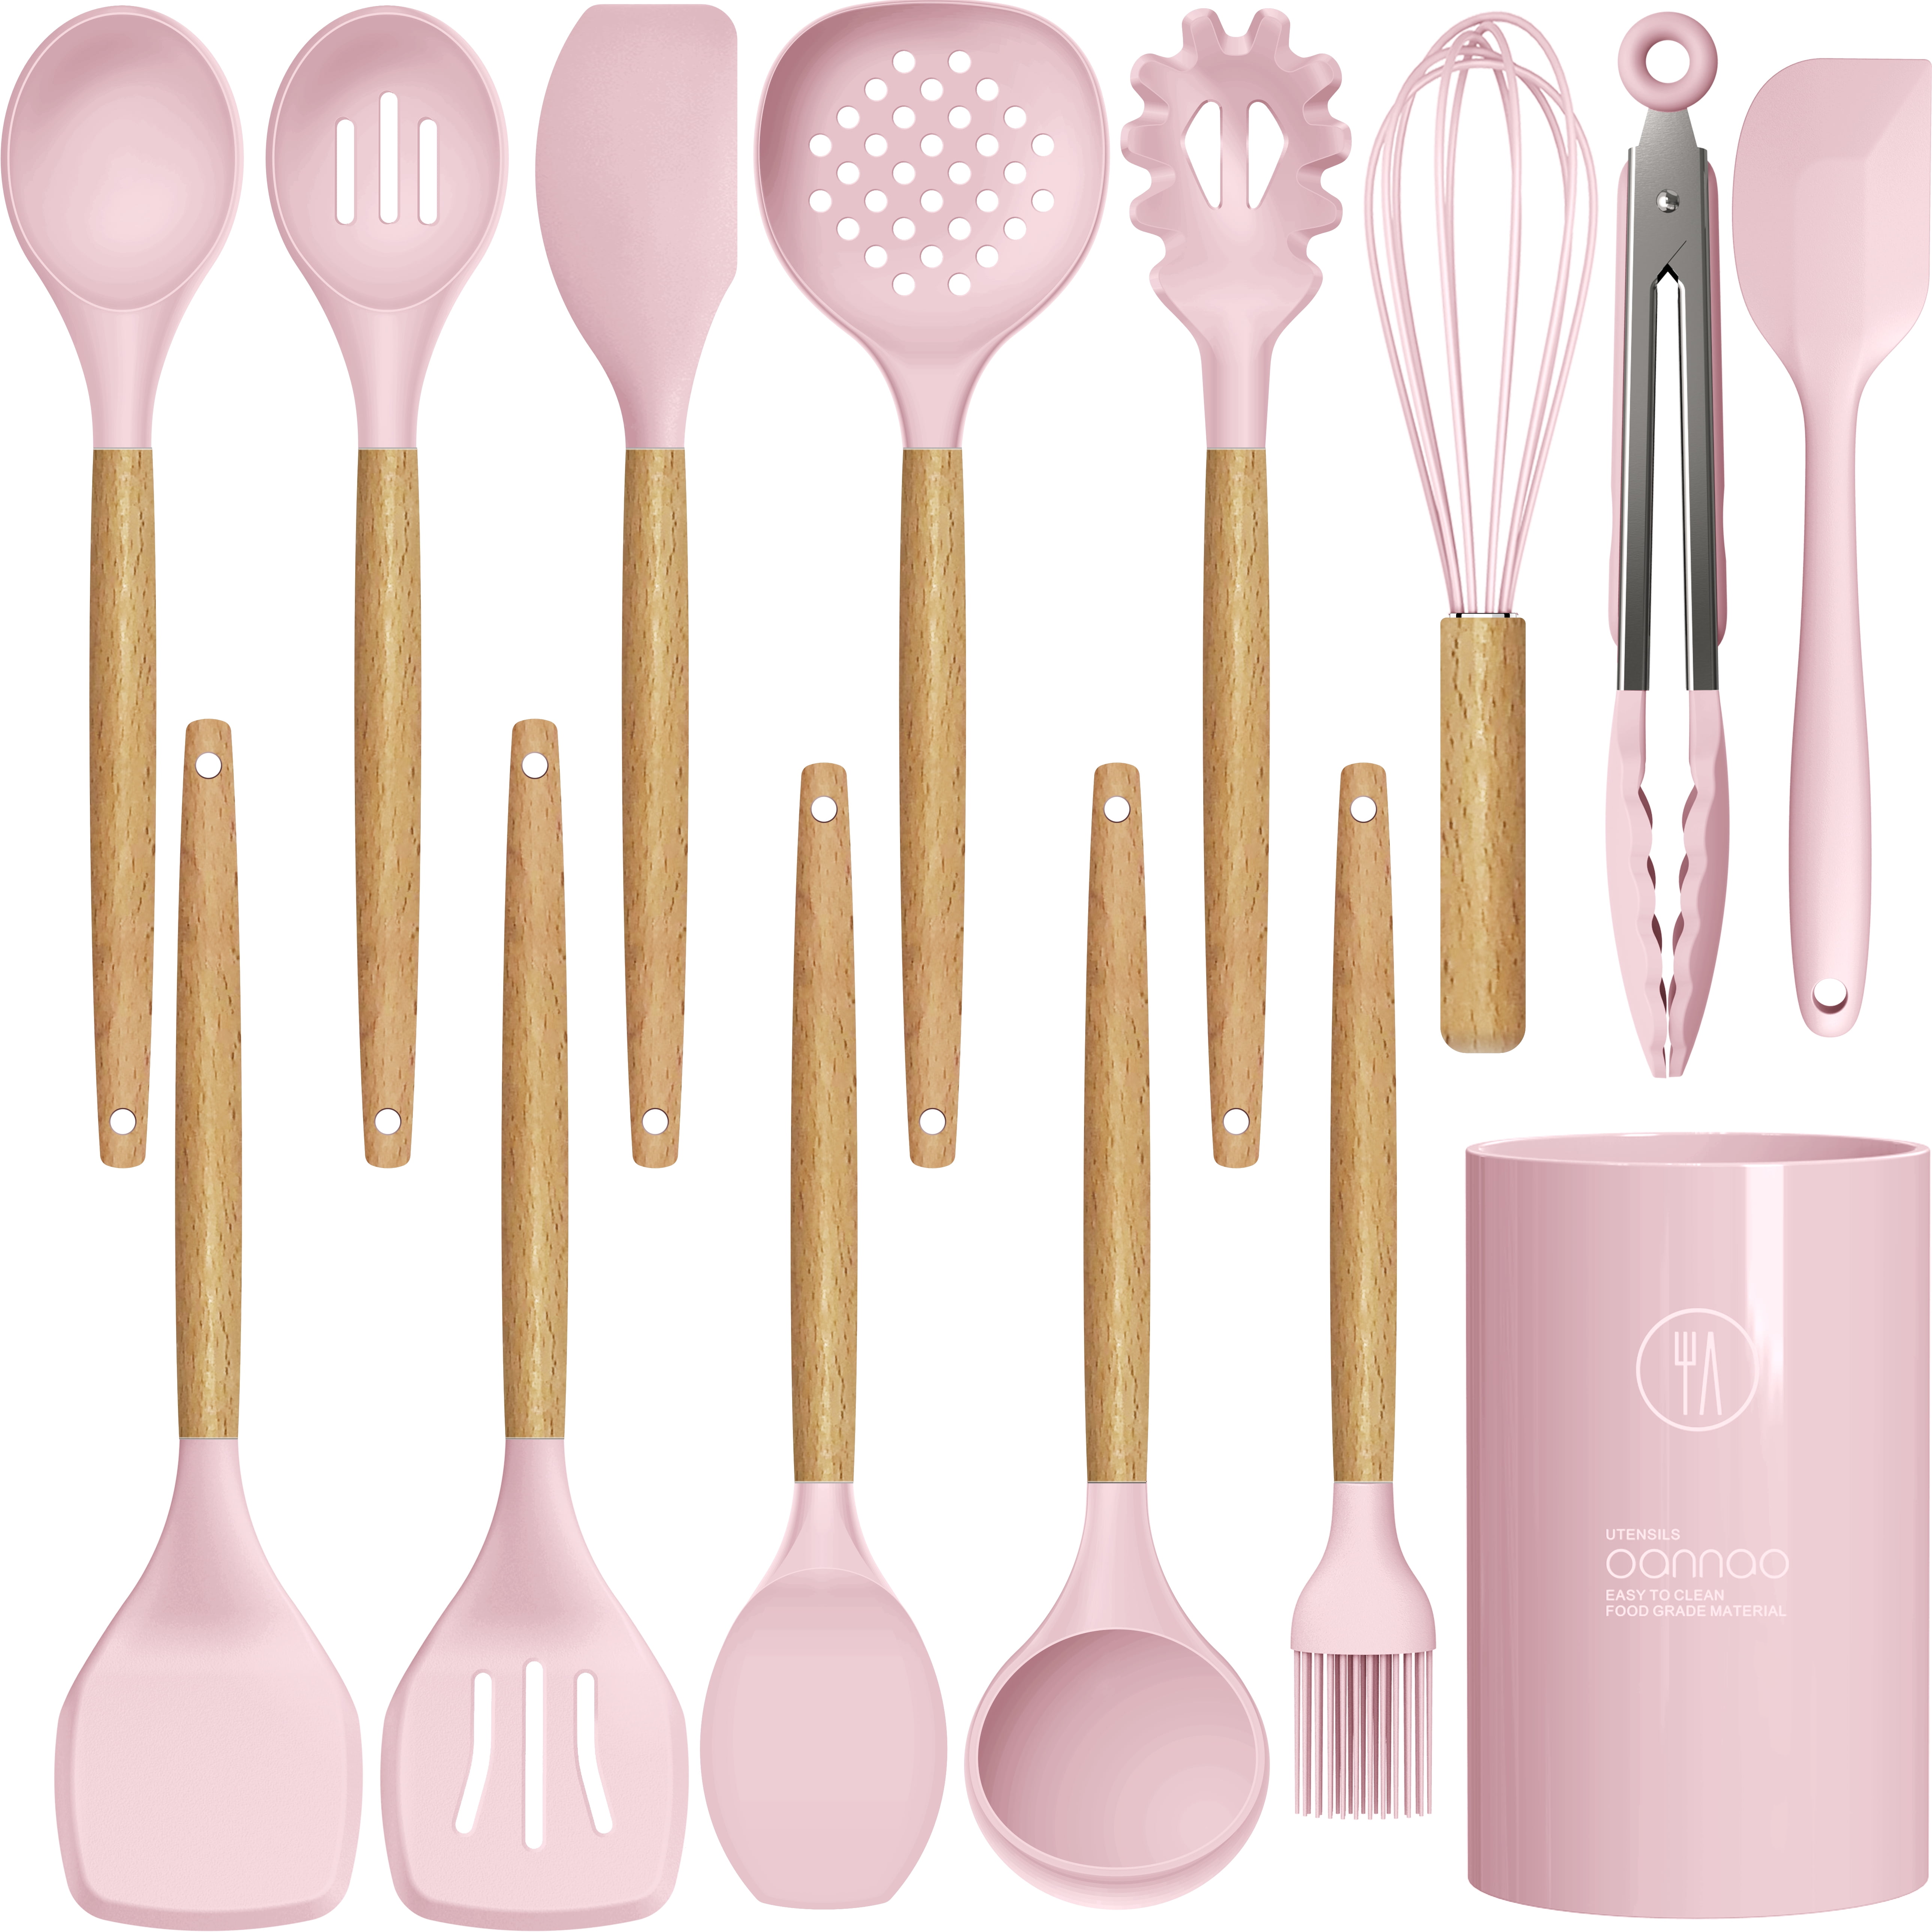 Cooking Utensils Set - Non-stick Silicone Kitchen Tools, Pink